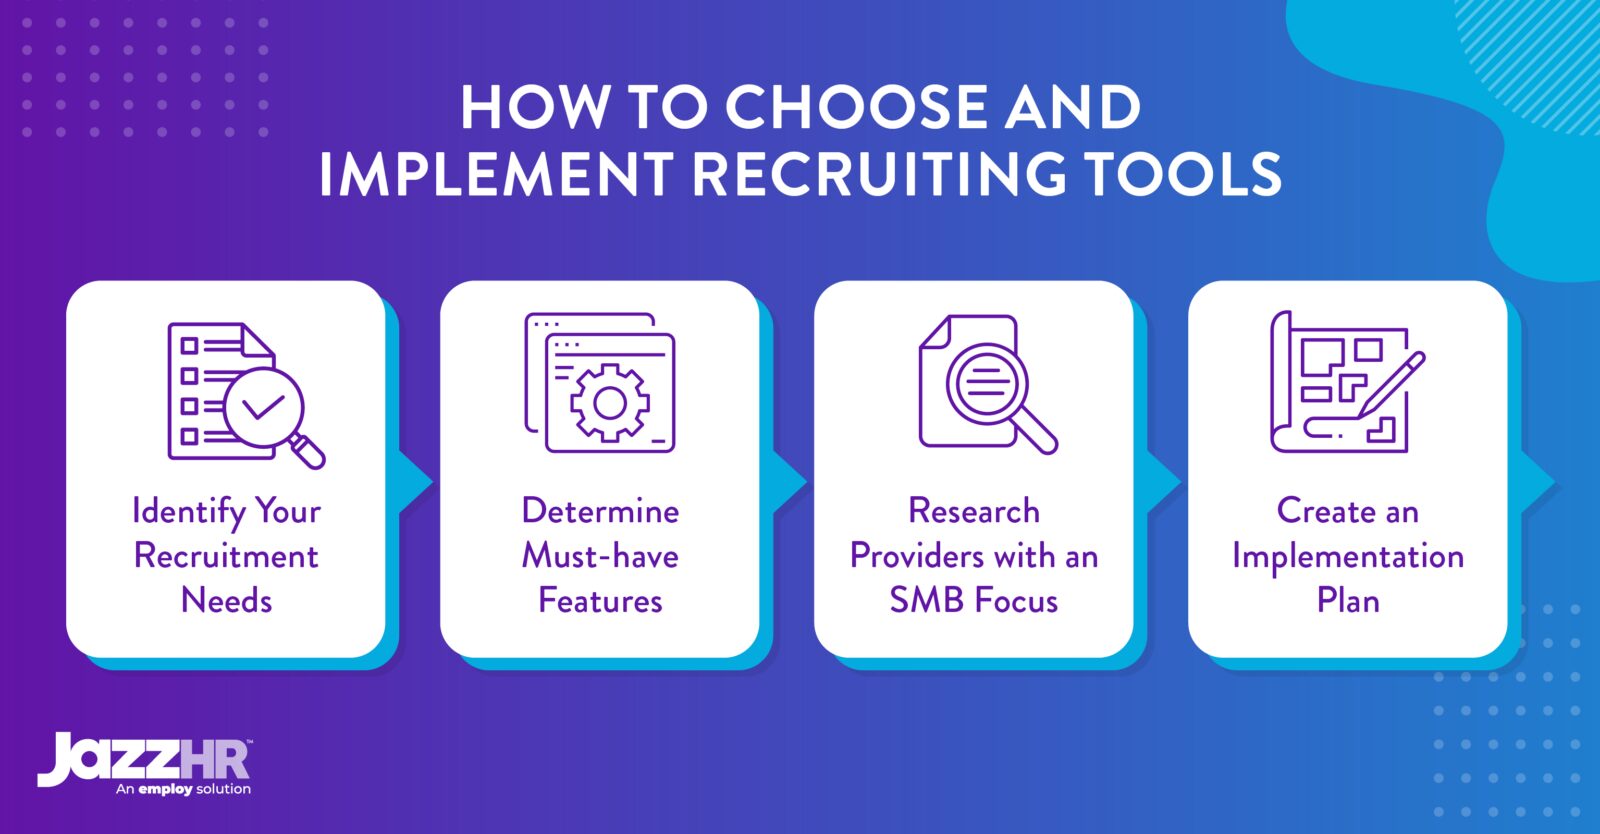 the steps for choosing and implementing recruiting tools (as explained below).